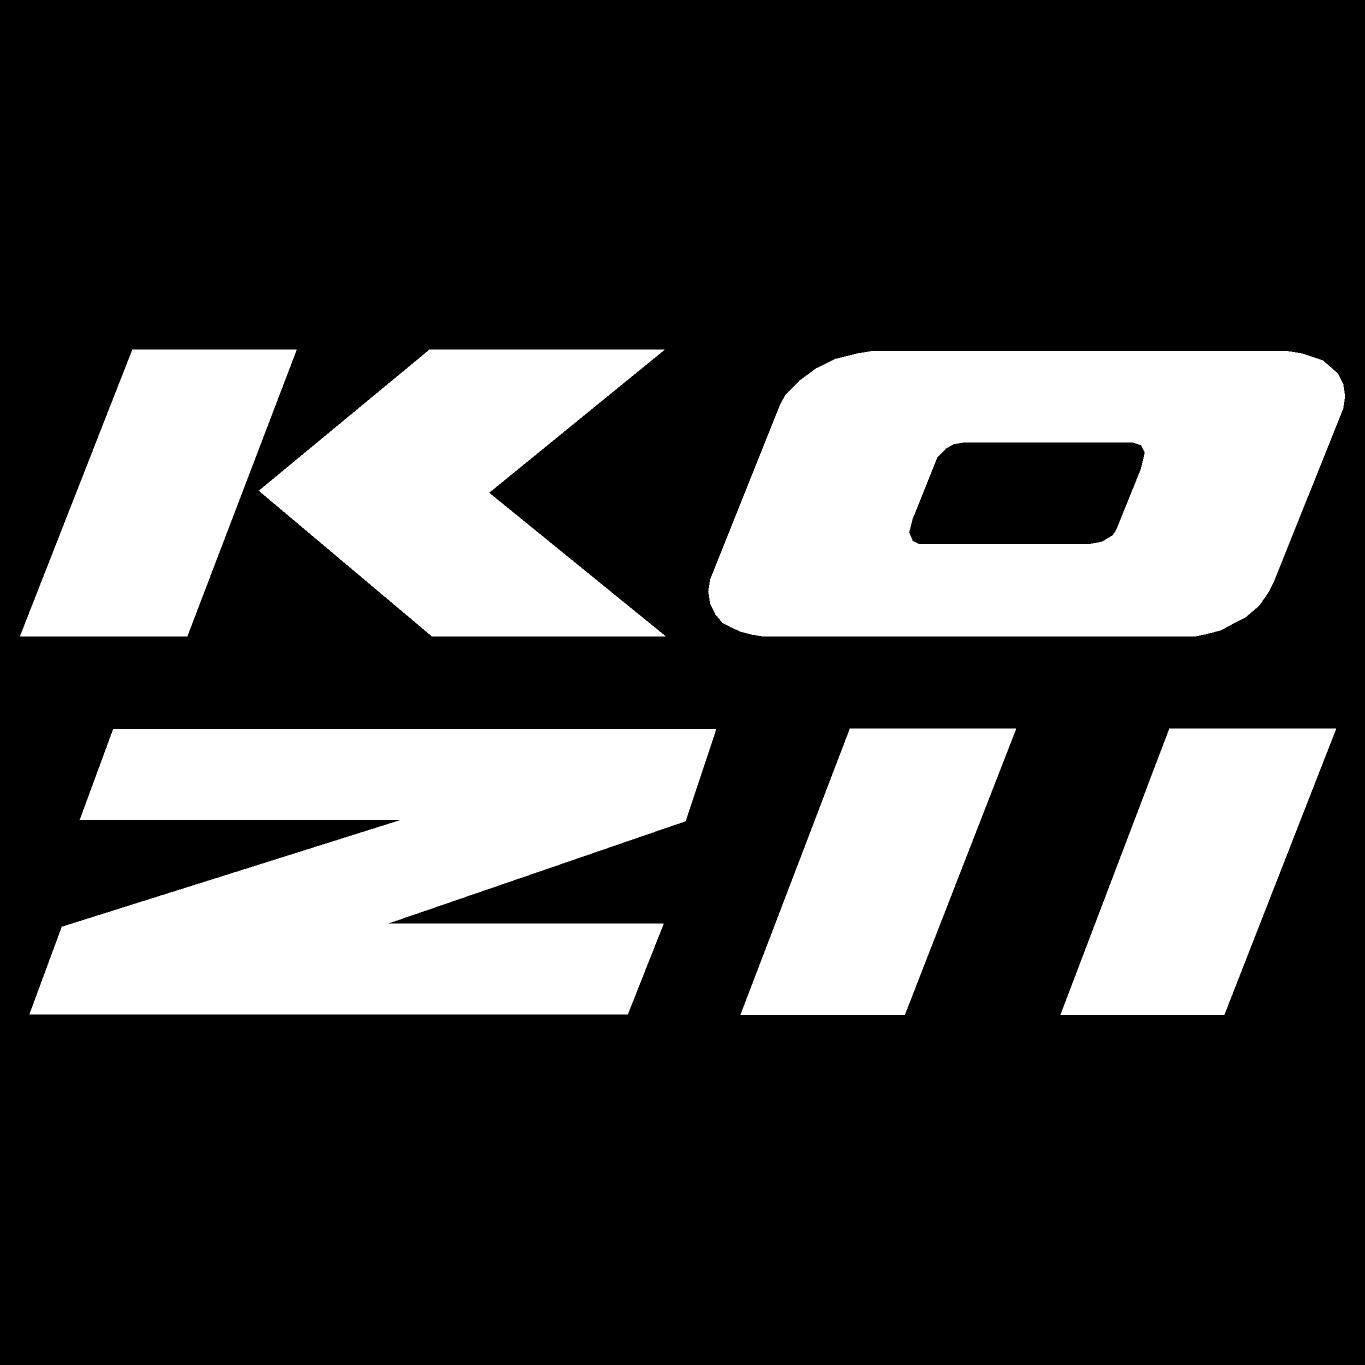 All Australian Swimwear. Whether you play or train in the surf, sun, sand, pool or kayak, you will look and FEEL GREAT IN KOZII #kozii #koziicourtz #TEAMKOZII